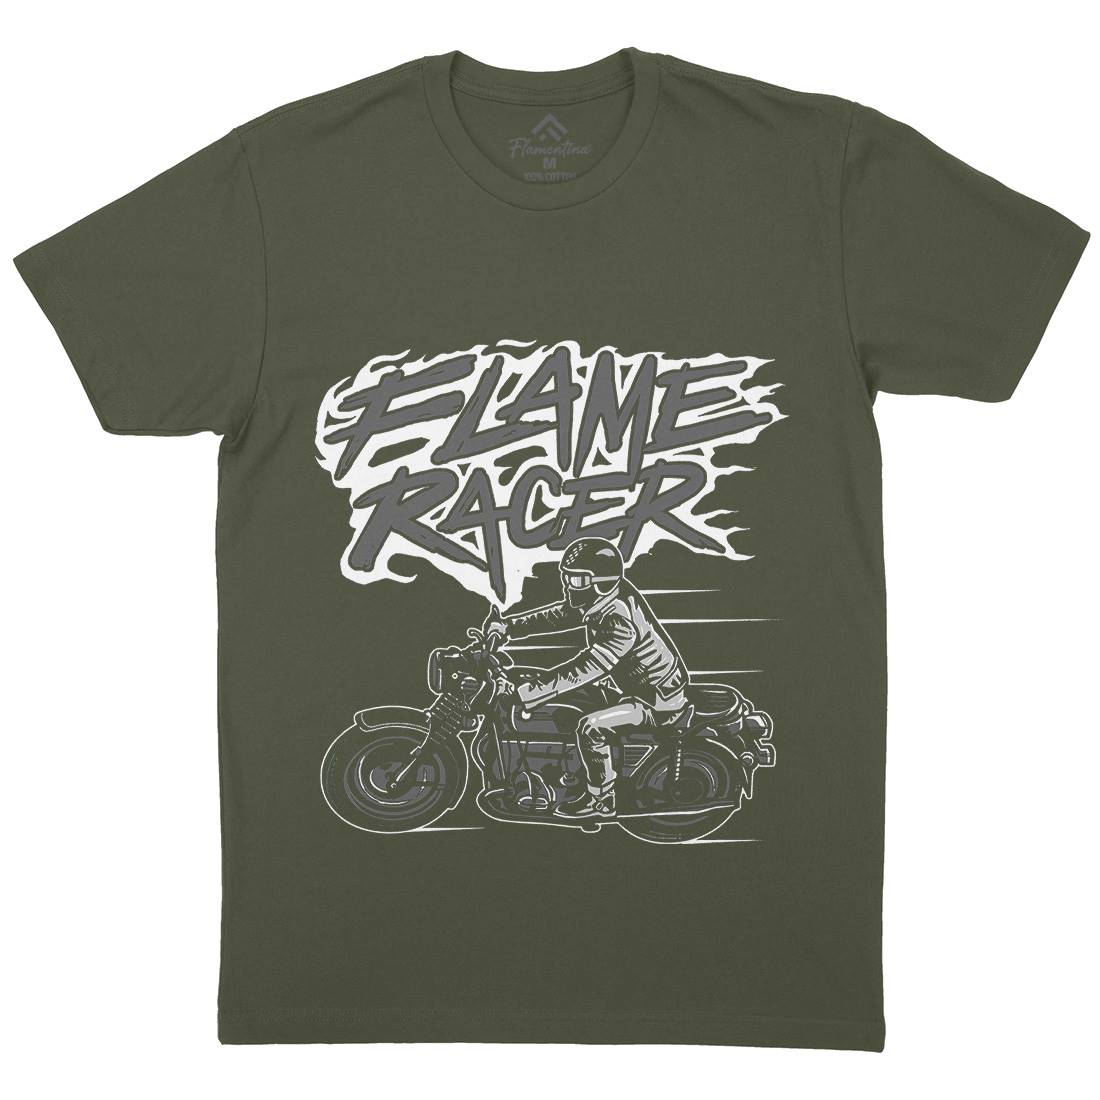 Flame Racer Mens Organic Crew Neck T-Shirt Motorcycles A530